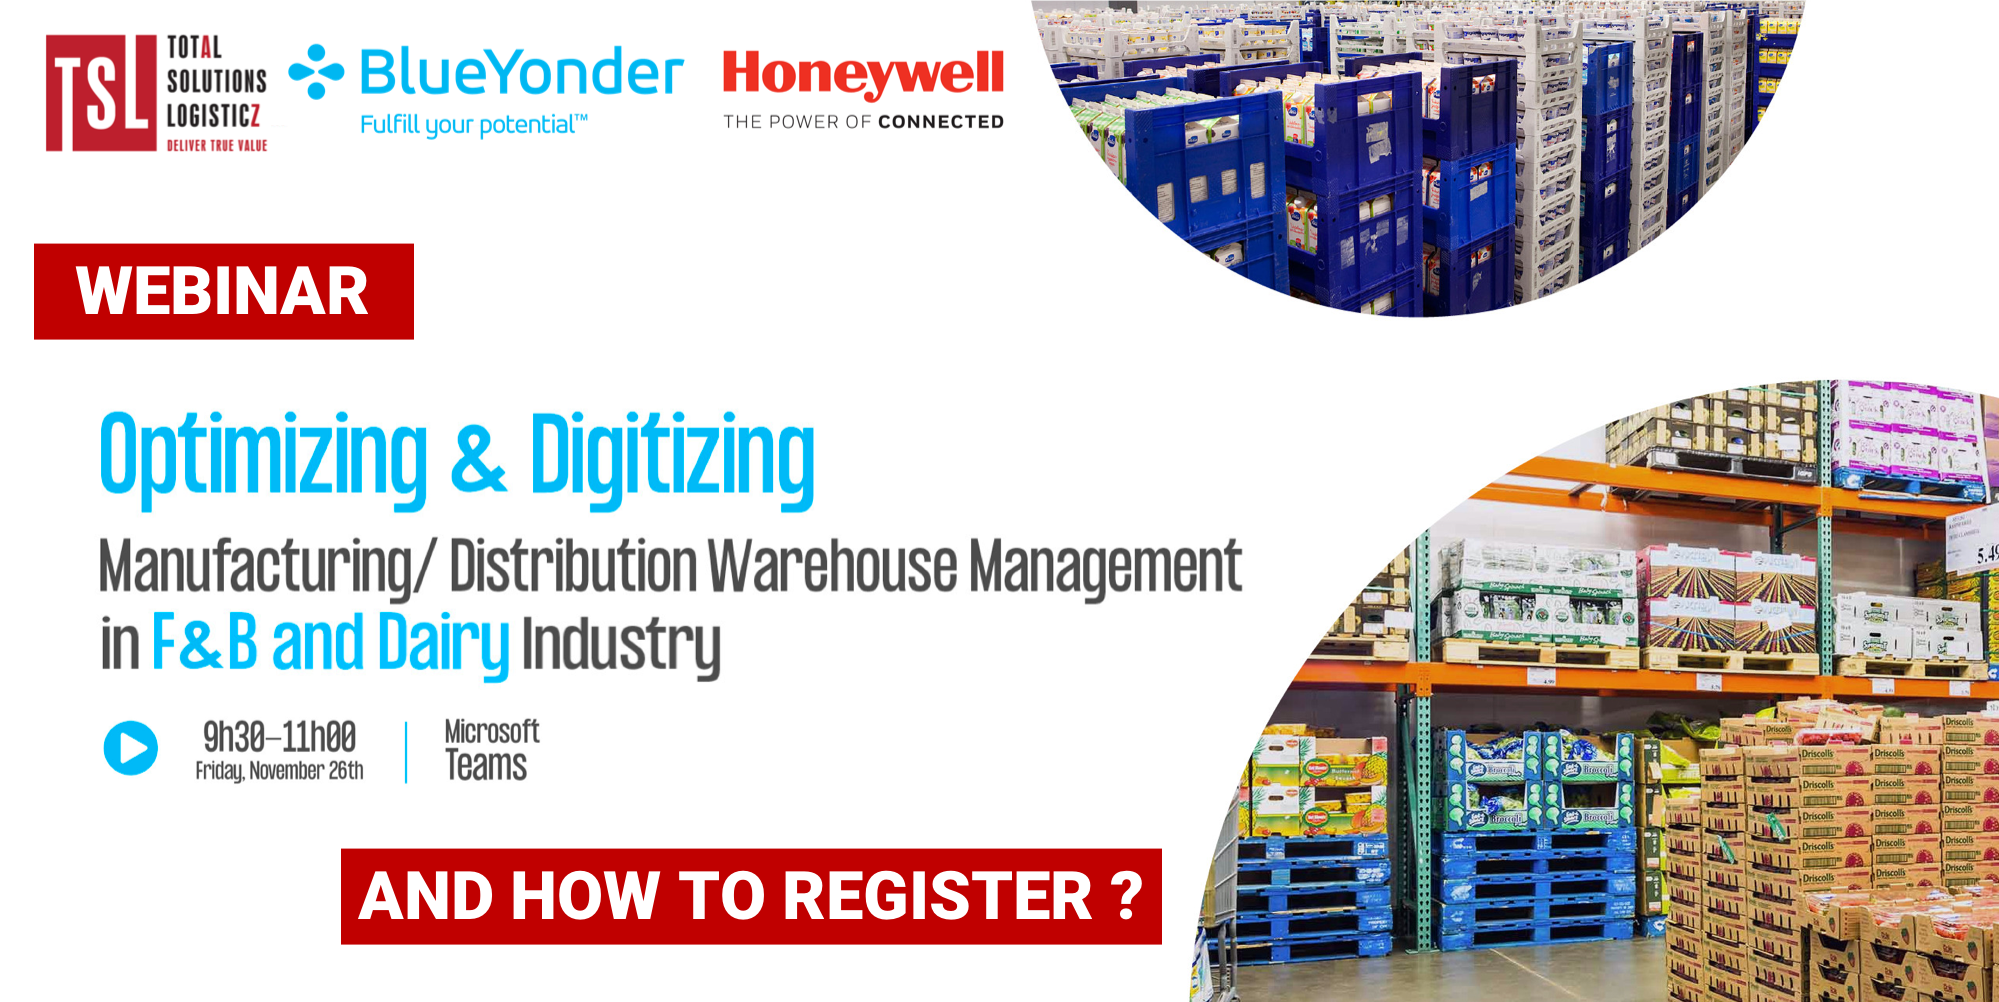 Webinar: “Optimizing and digitizing Manufacturing/Distribution Warehouse Management in F&B and Dairy industry” and how to register